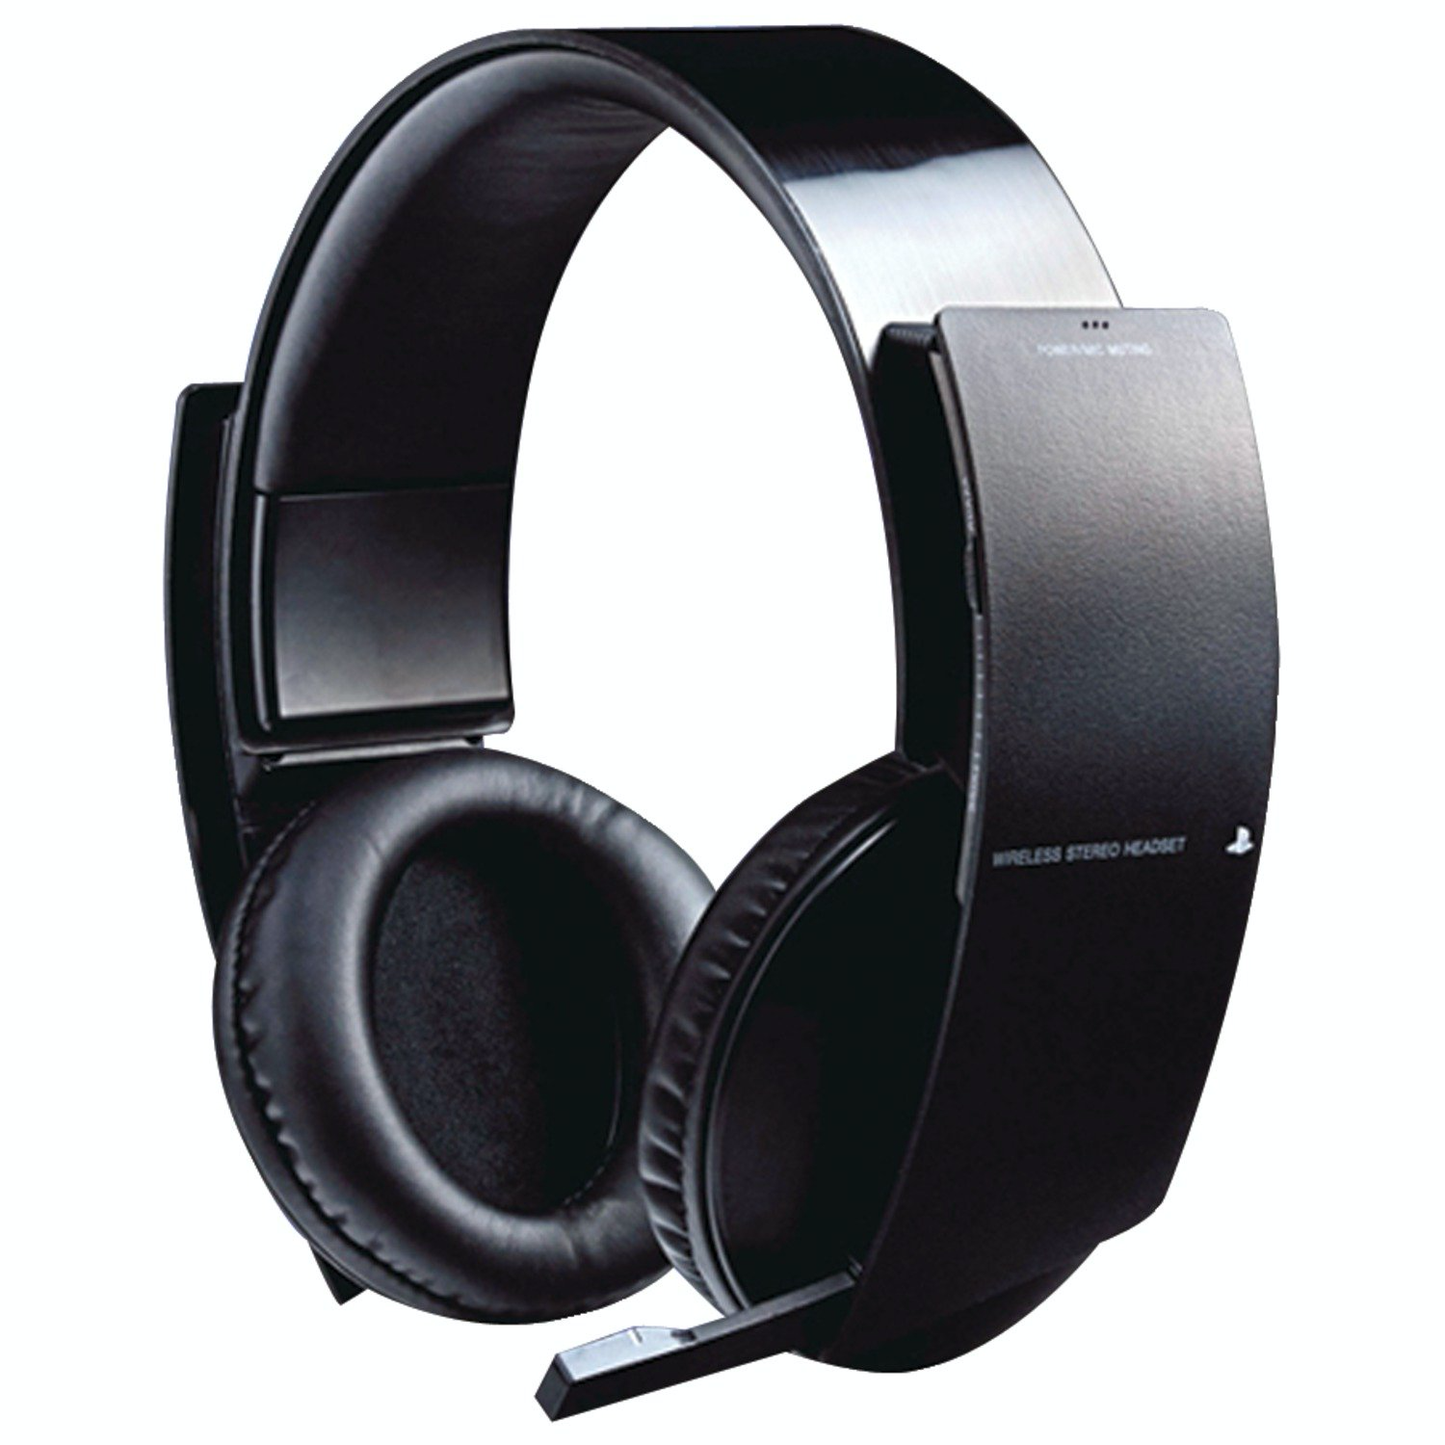 Official Wireless Stereo Headset - PS3